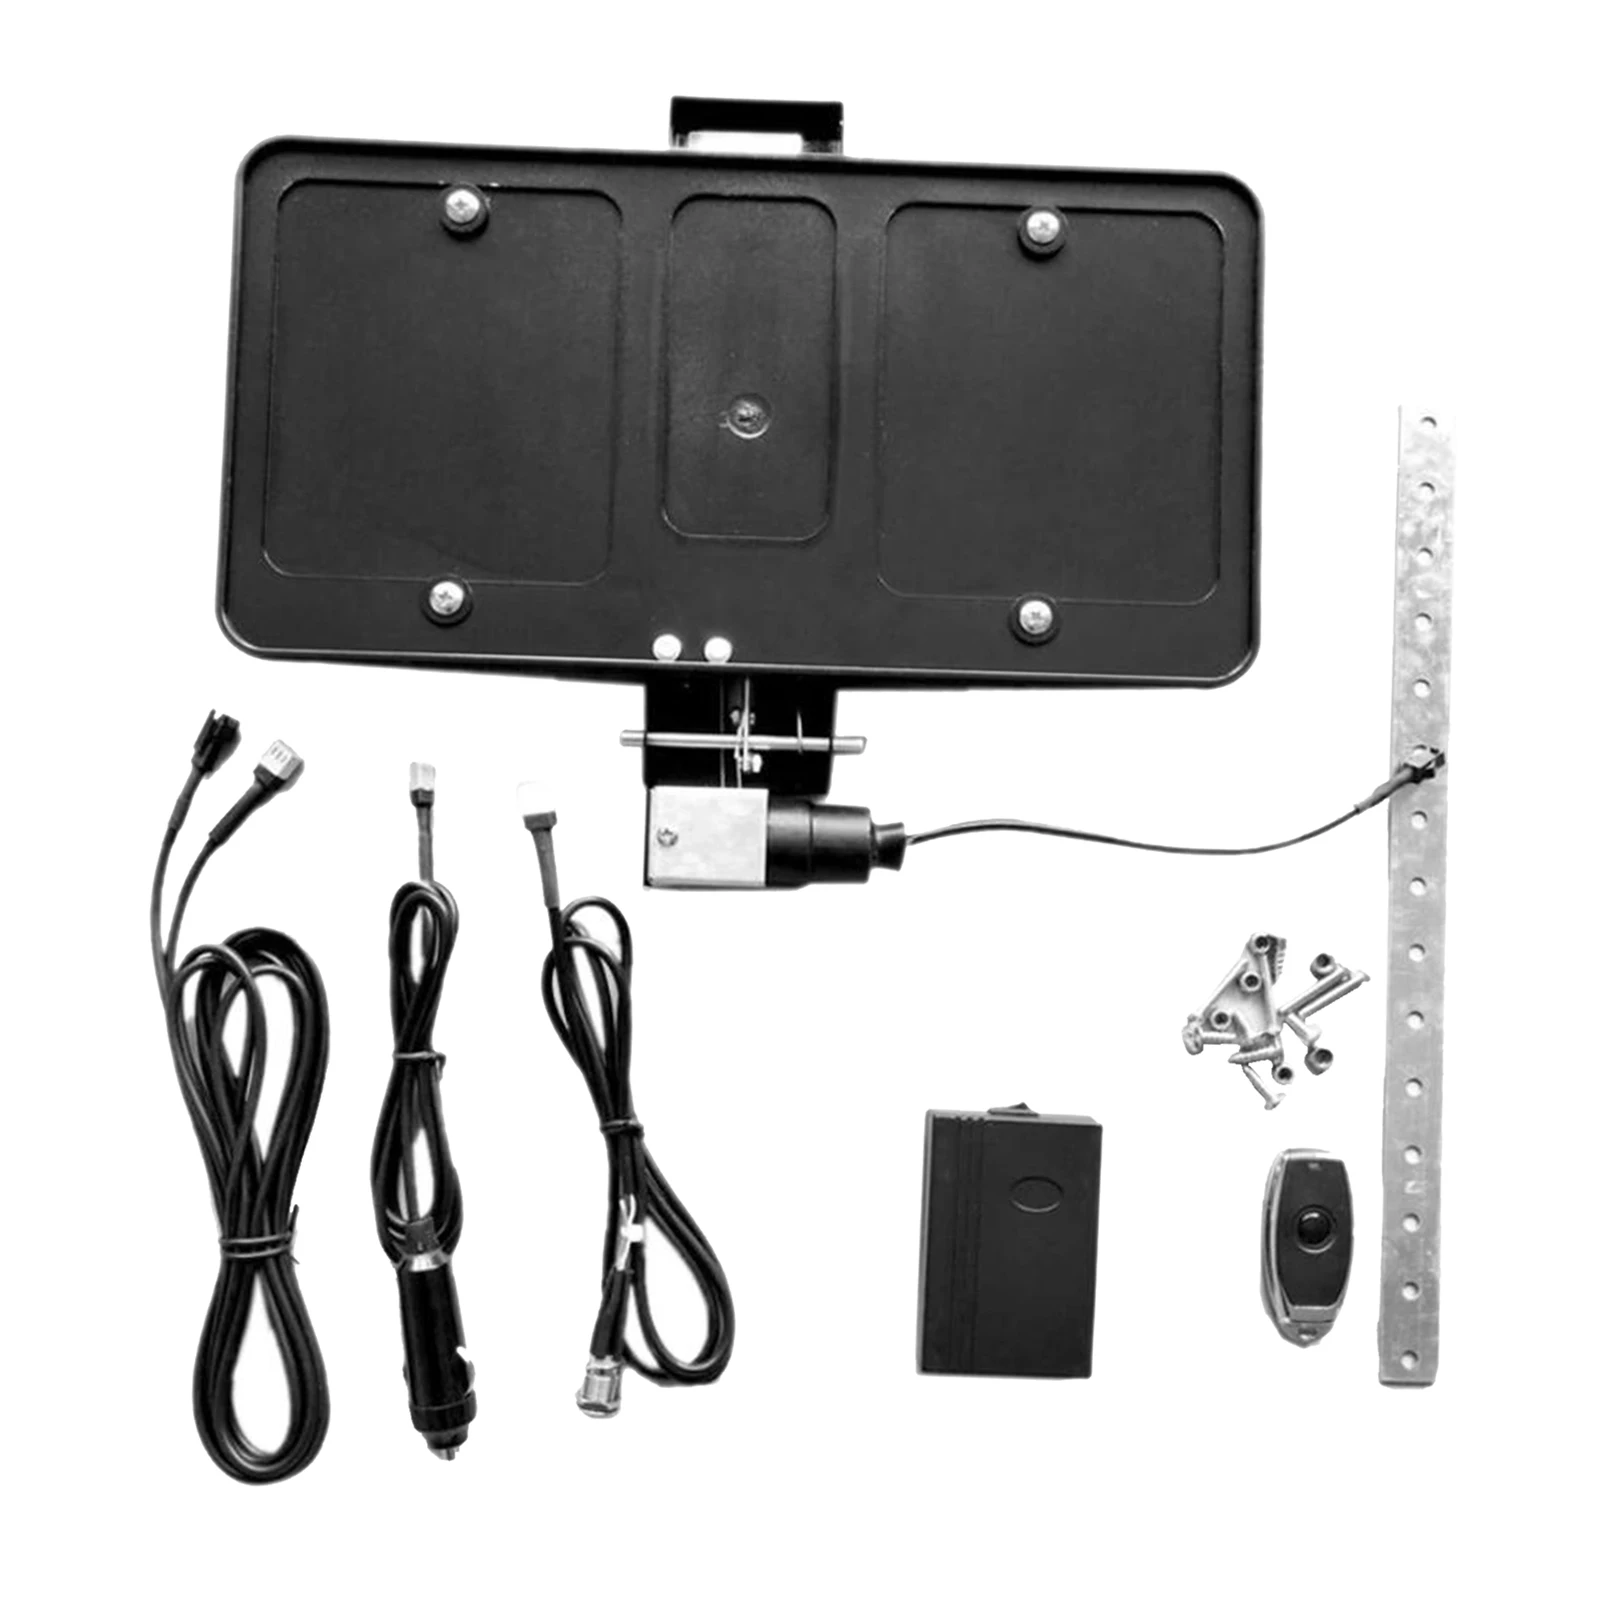 Shutter Cover Up Flip Retractable Electric Stealth License Plate Frame with Remote Control Bracket Holder Rust Proof